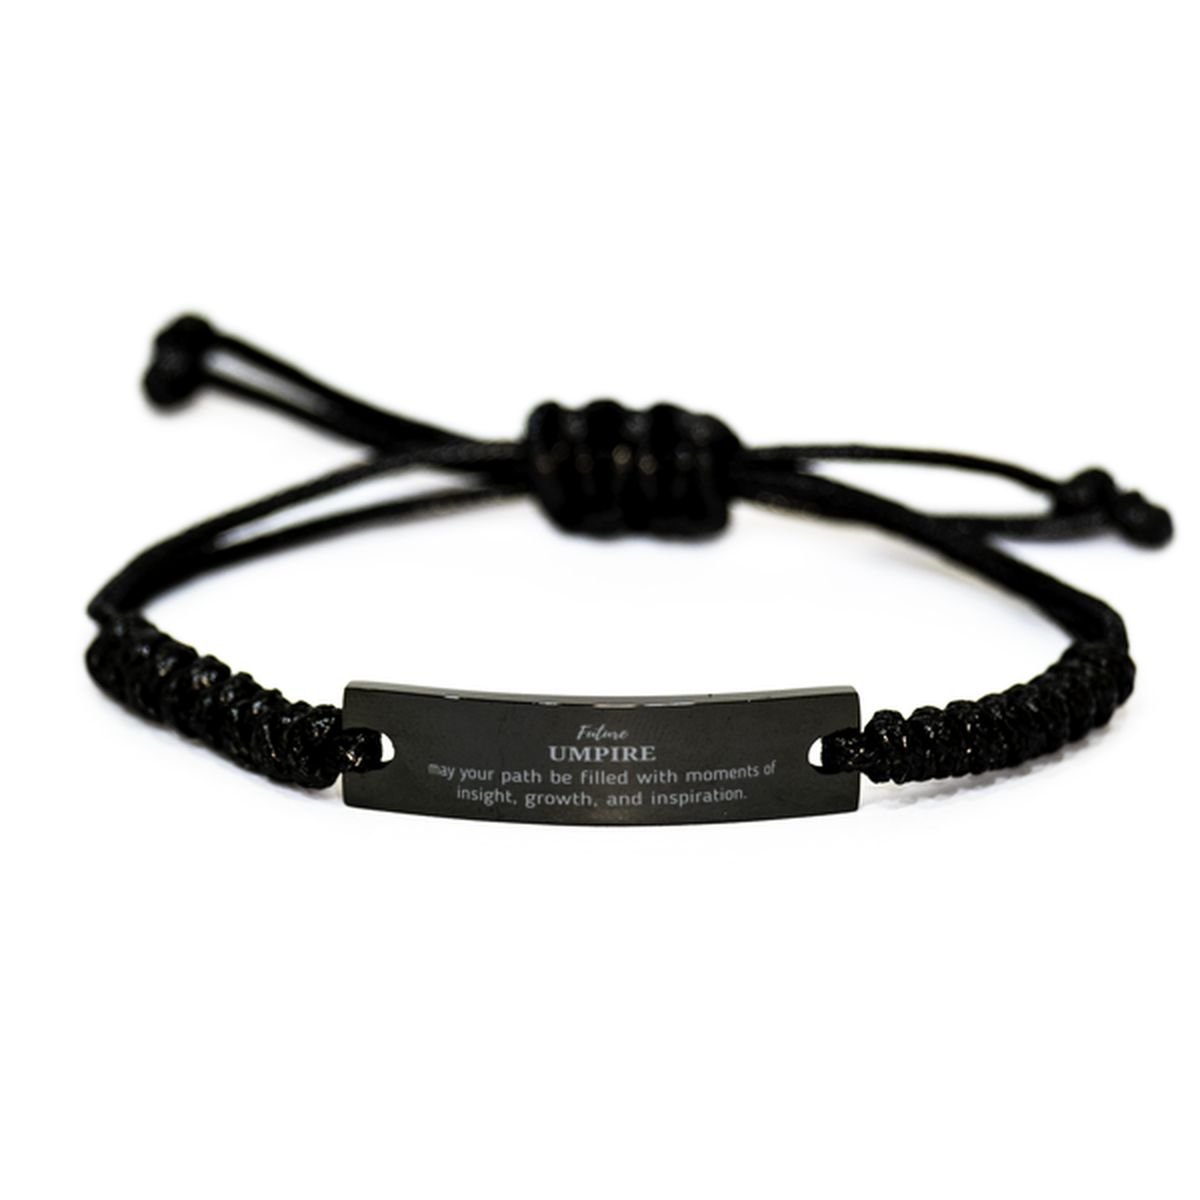 Future Umpire Gifts, May your path be filled with moments of insight, Graduation Gifts for New Umpire, Christmas Unique Black Rope Bracelet For Men, Women, Friends